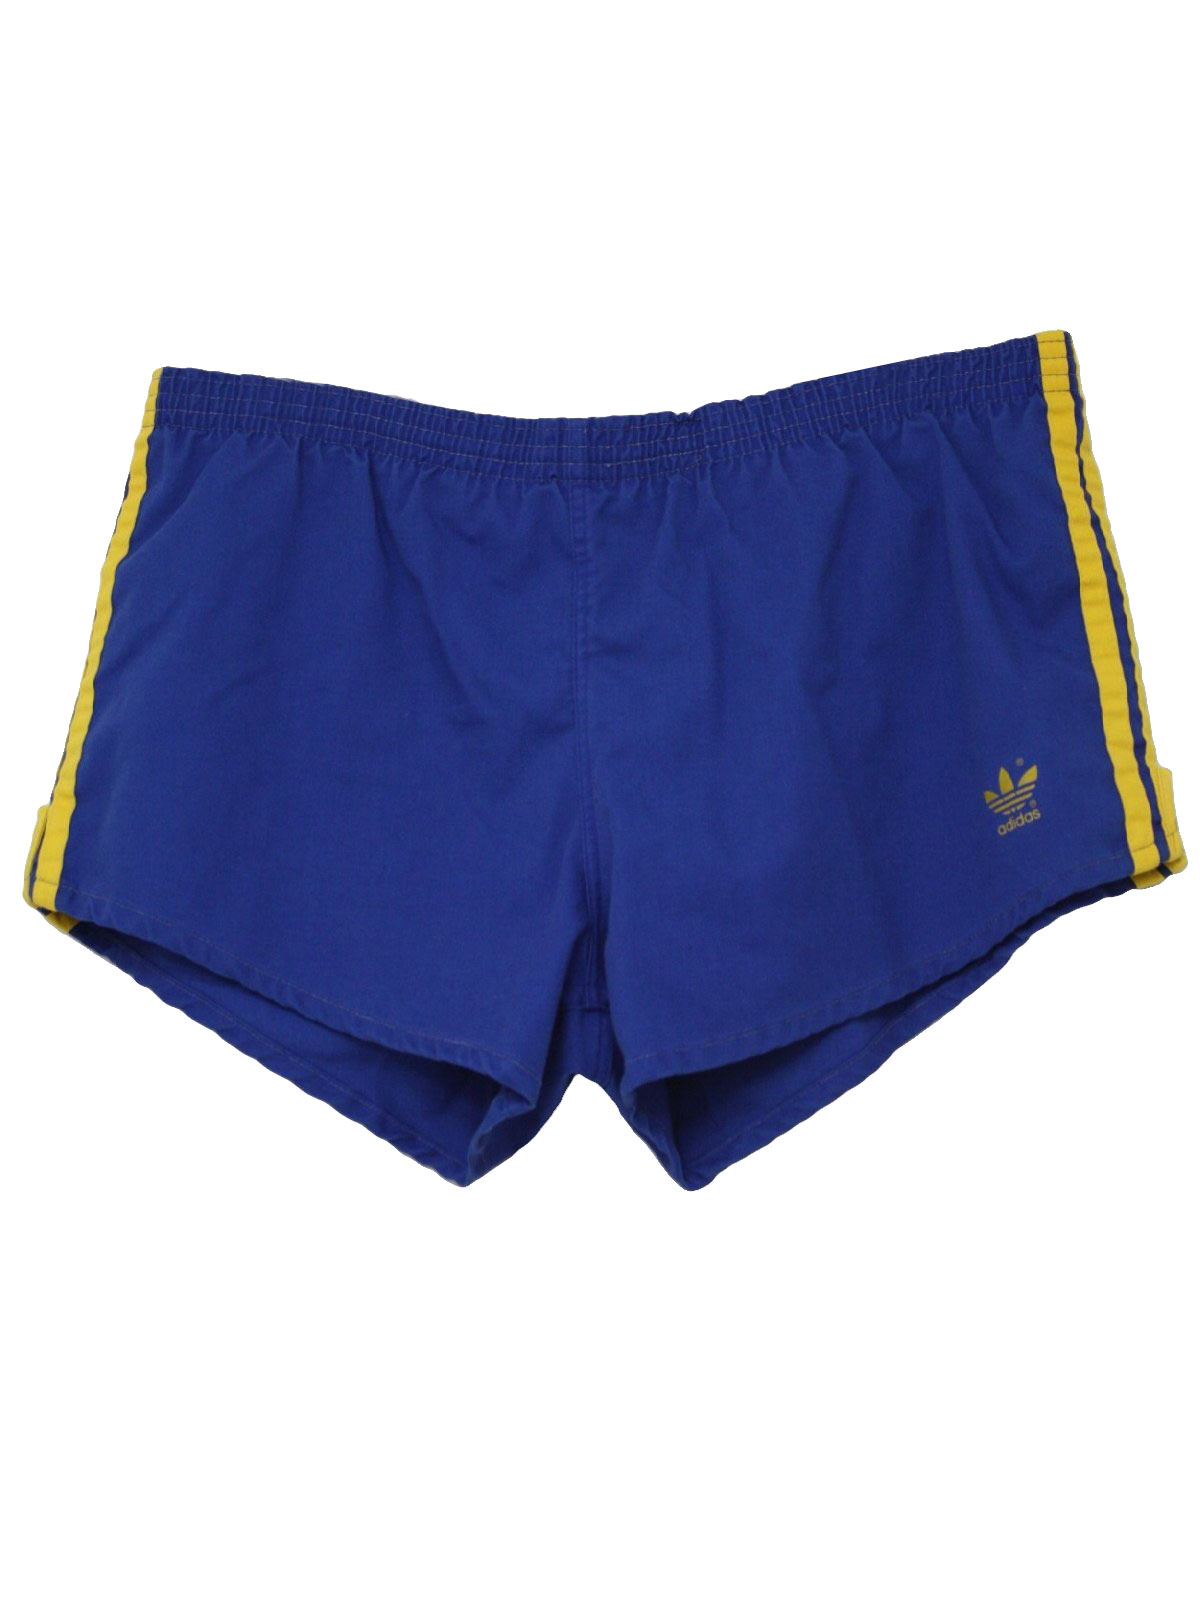 1980's Retro Shorts: 80s -Adidas- Mens blue and yellow cotton and ...